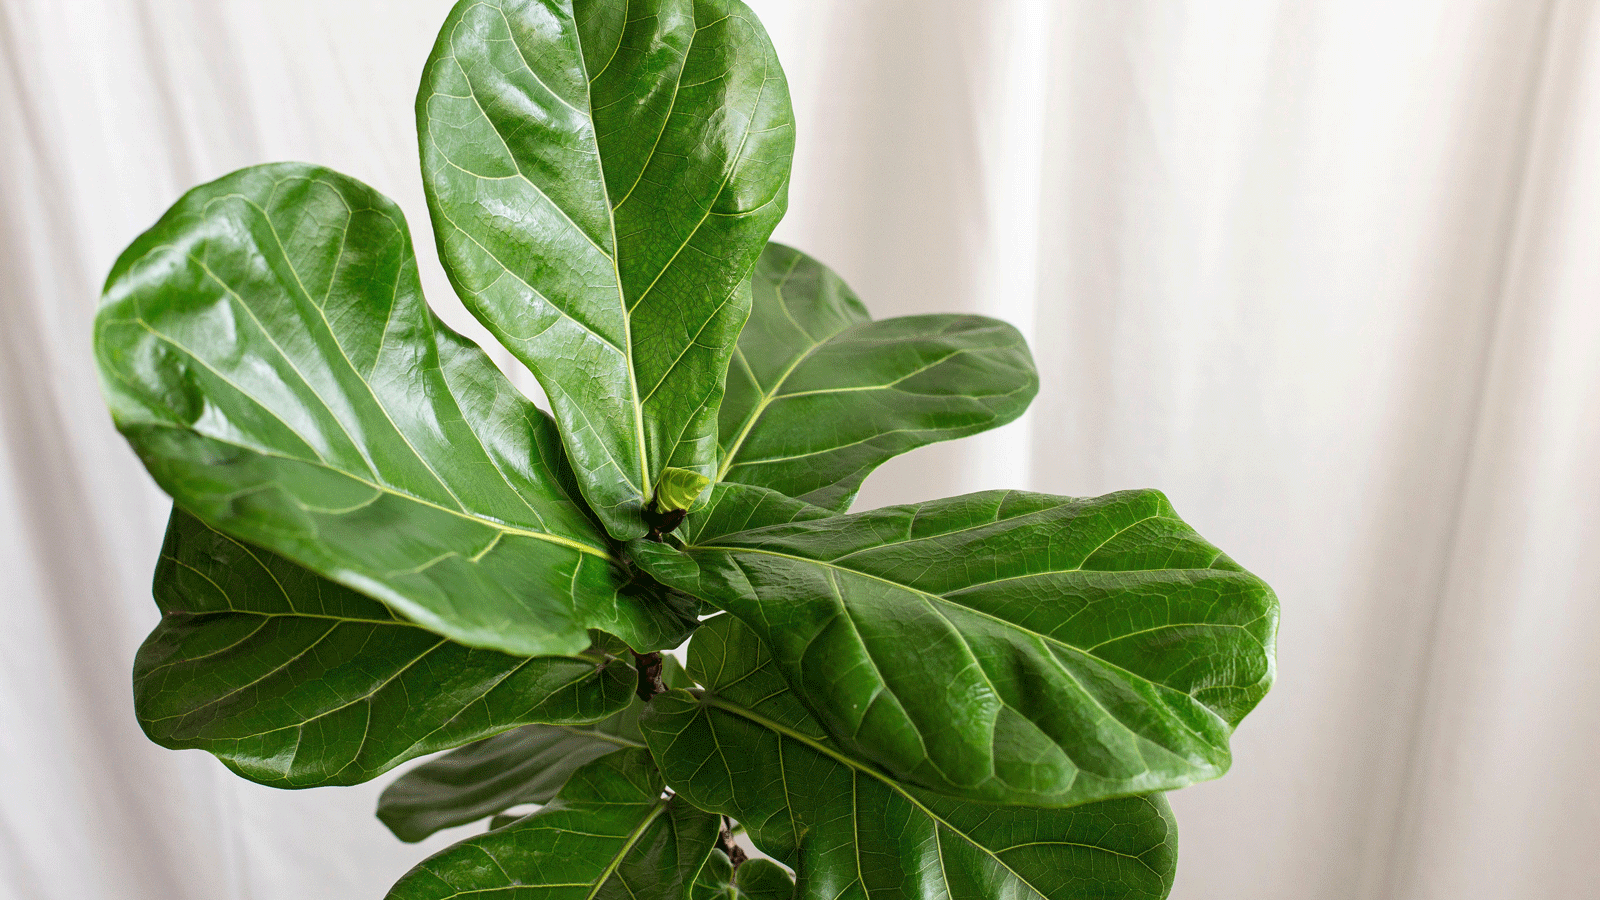 How to propagate a fiddle leaf fig and get more plants for free